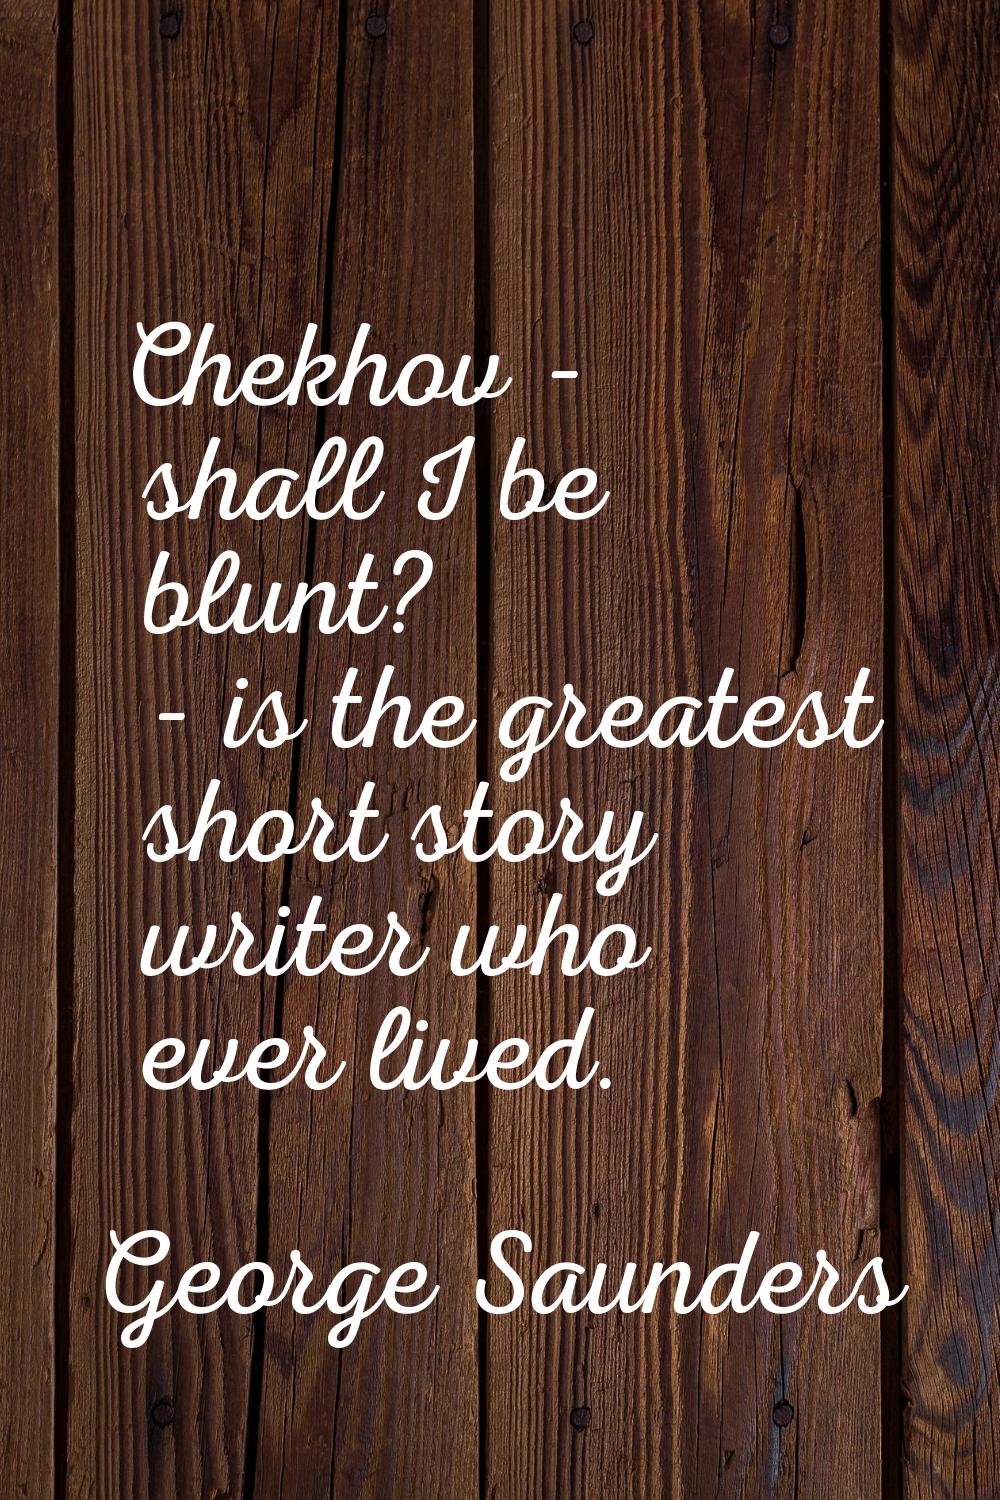 Chekhov - shall I be blunt? - is the greatest short story writer who ever lived.